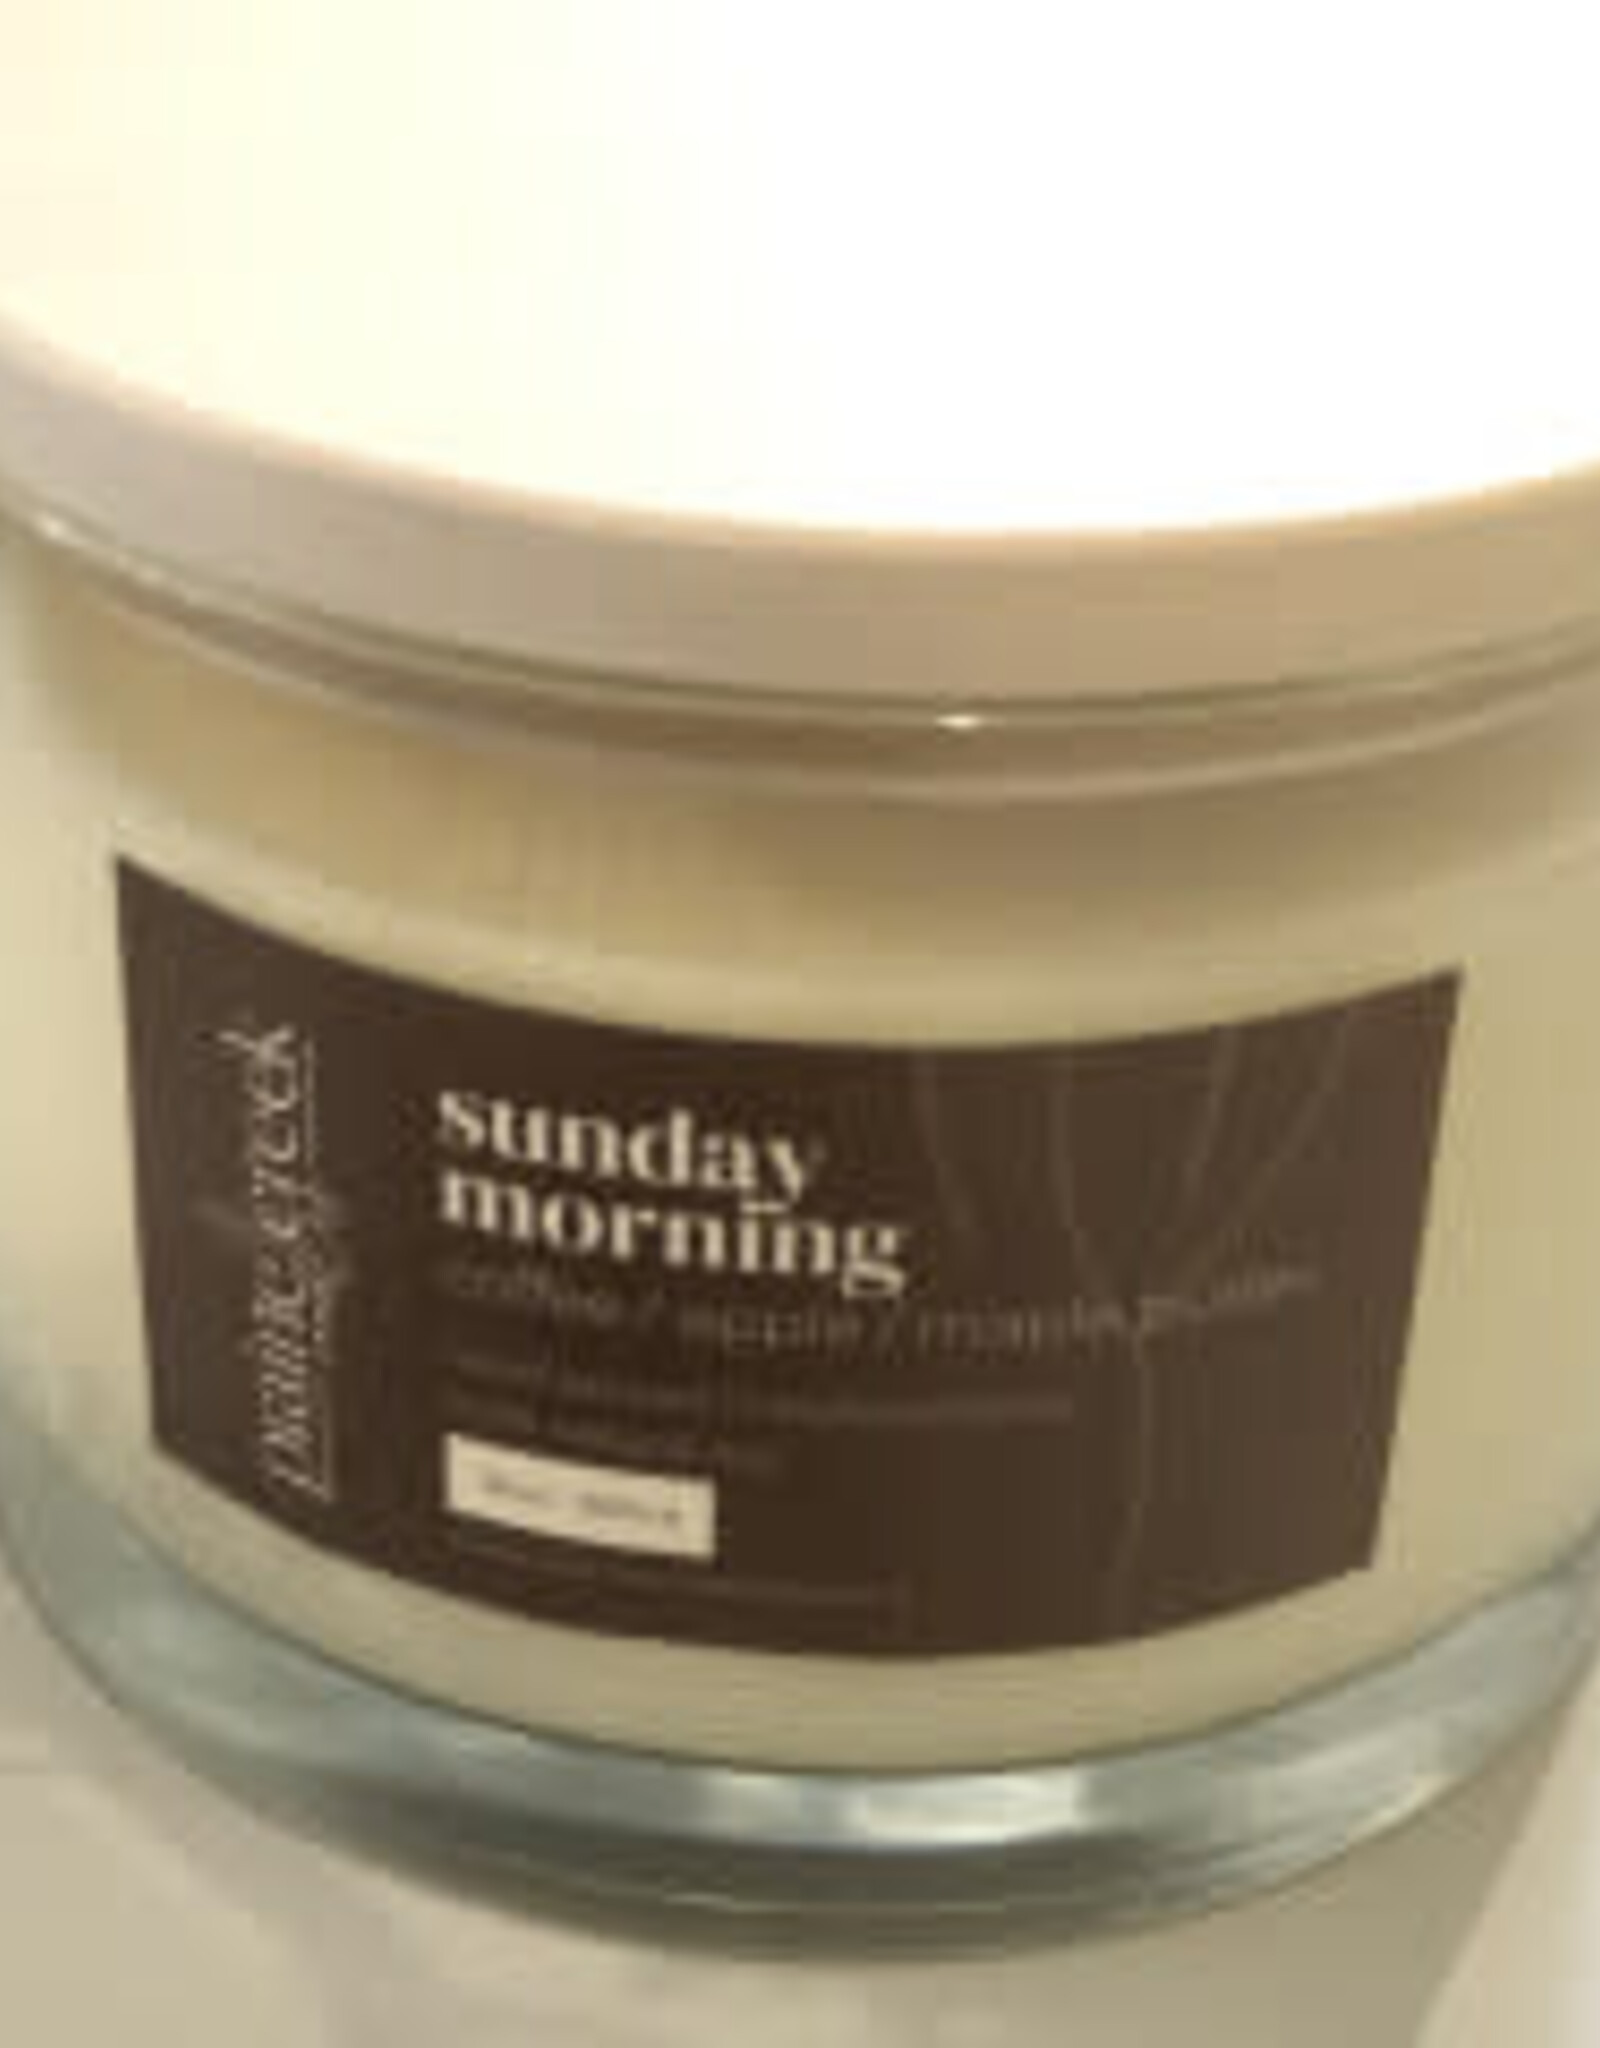 Prairie Creek Candles Prairie Creek Double Wick Candle Sunday Morning